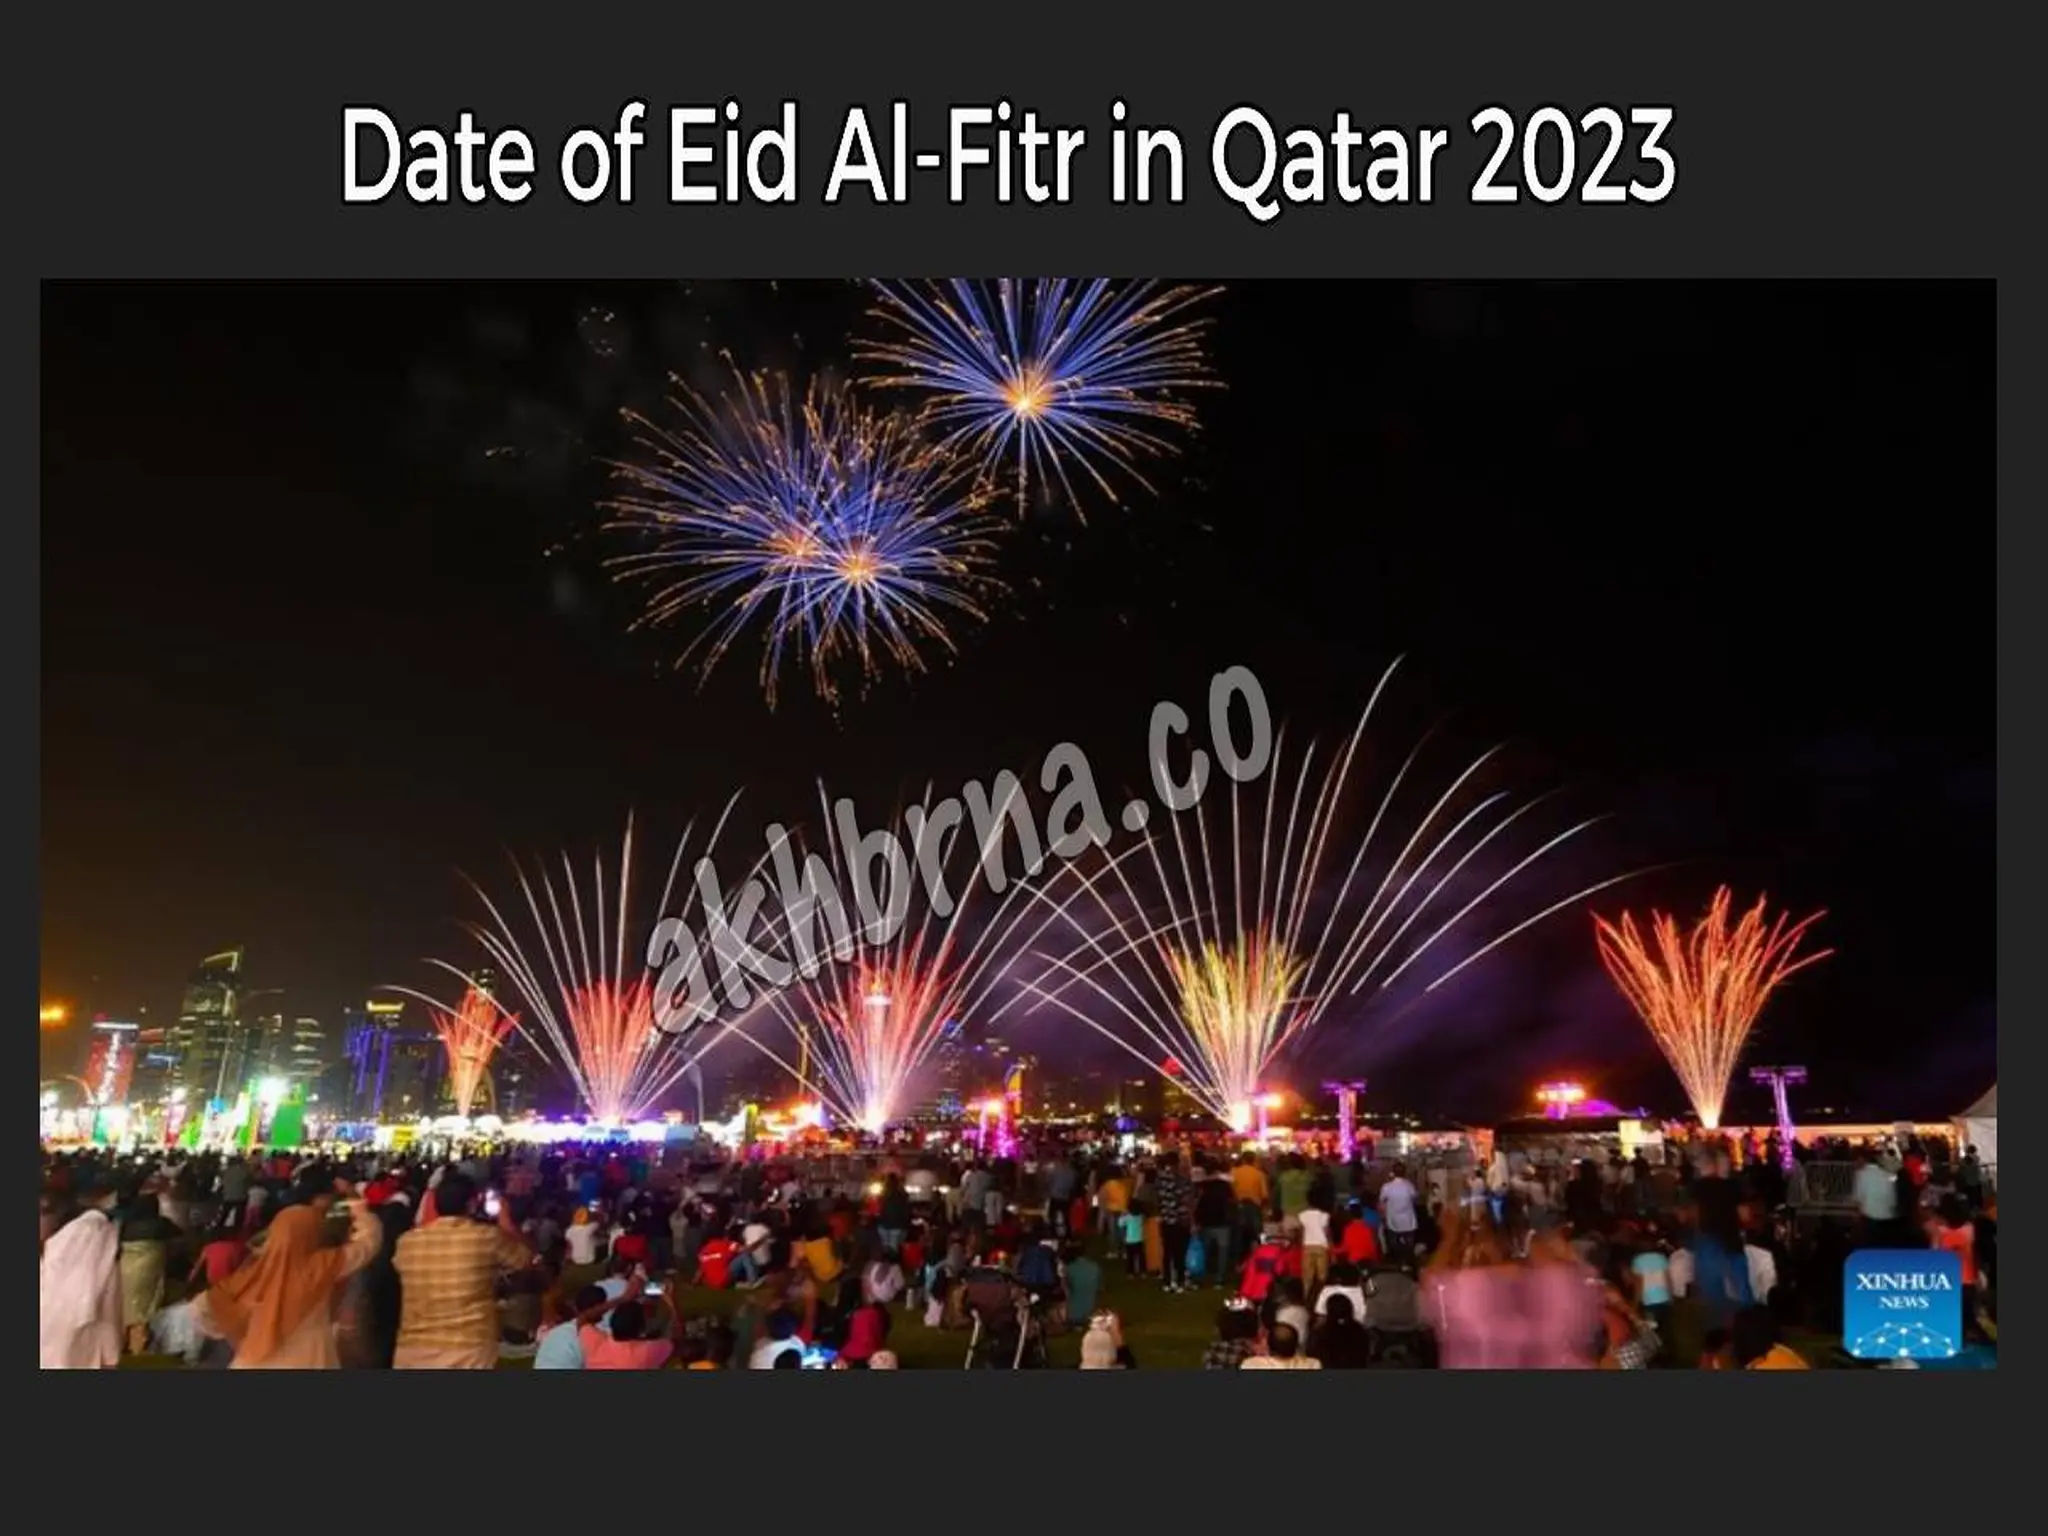 The date of the Eid Al-Fitr 2023 holiday in Qatar